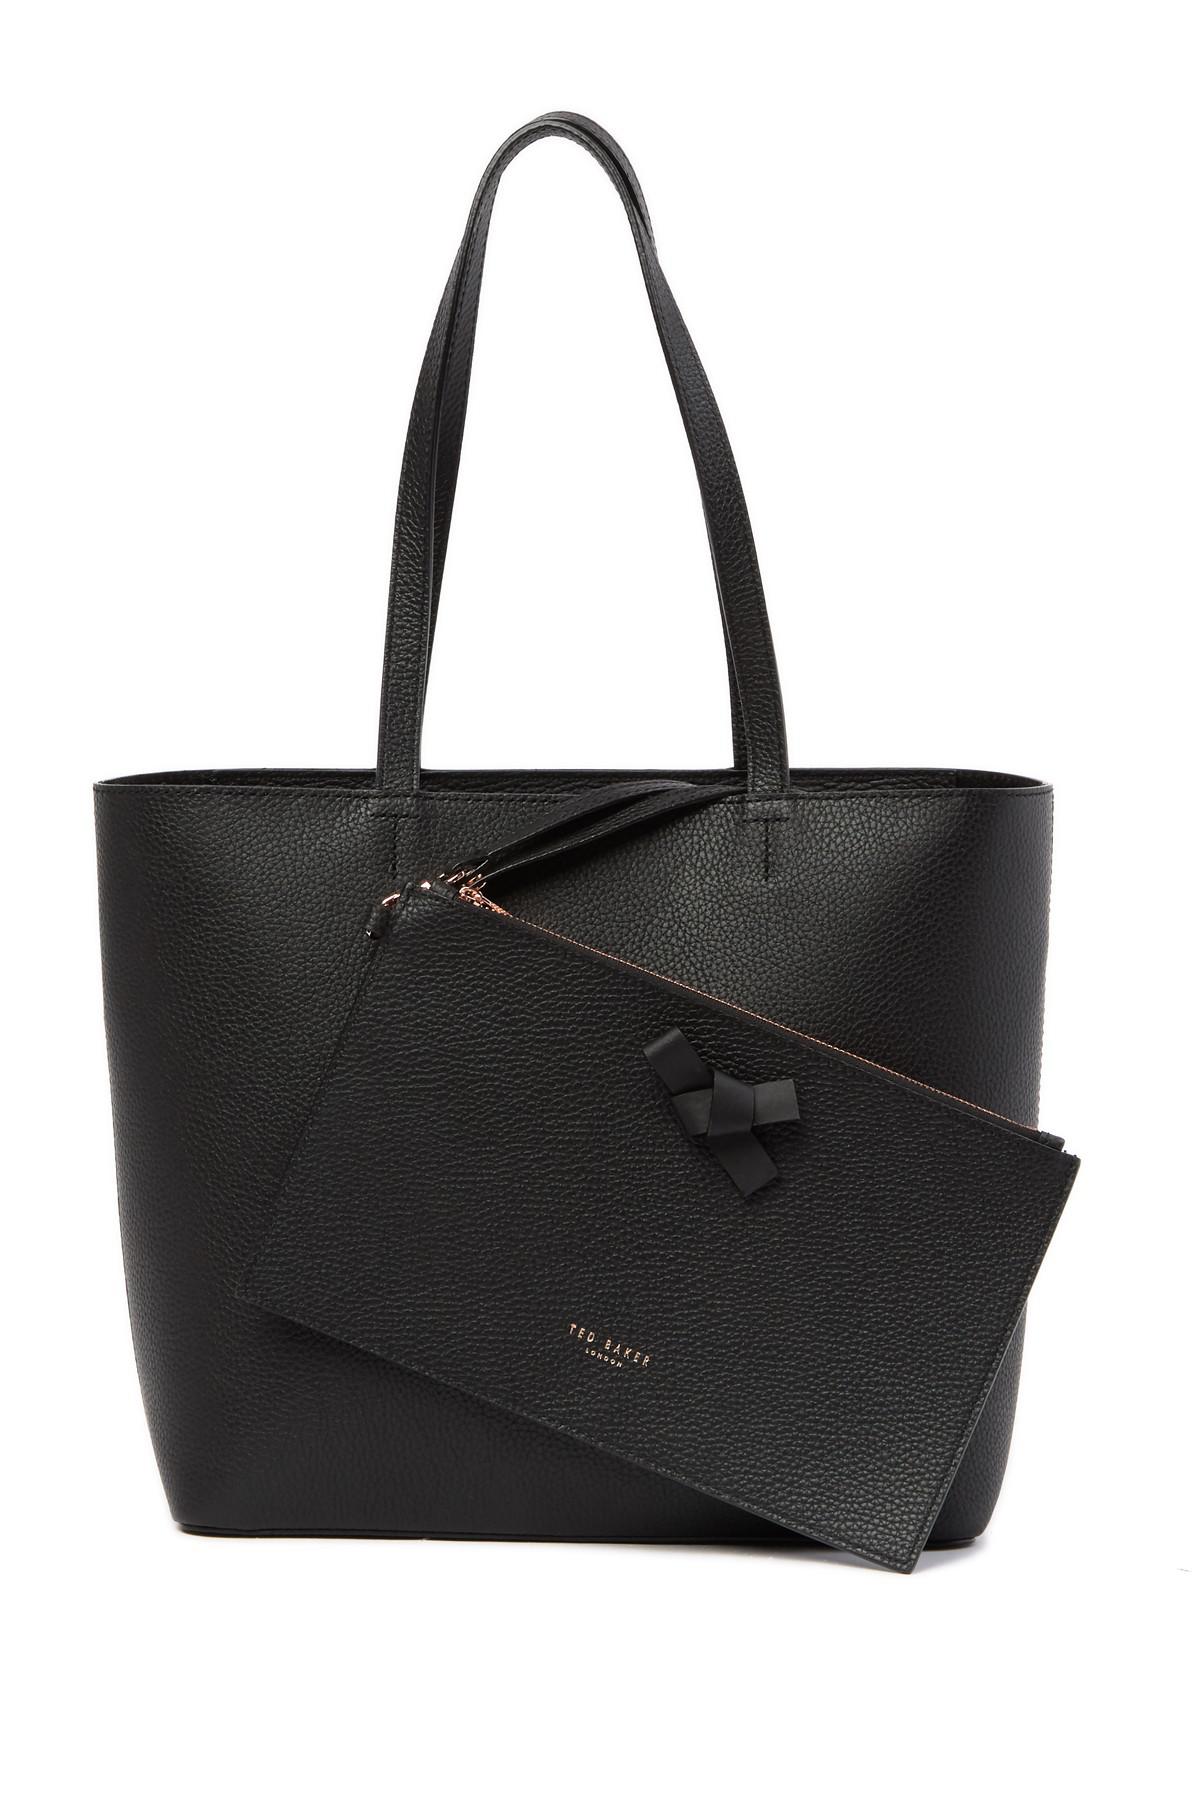 Ted Baker Allie Giant Knot Leather Shopper Tote Bag in Black - Lyst